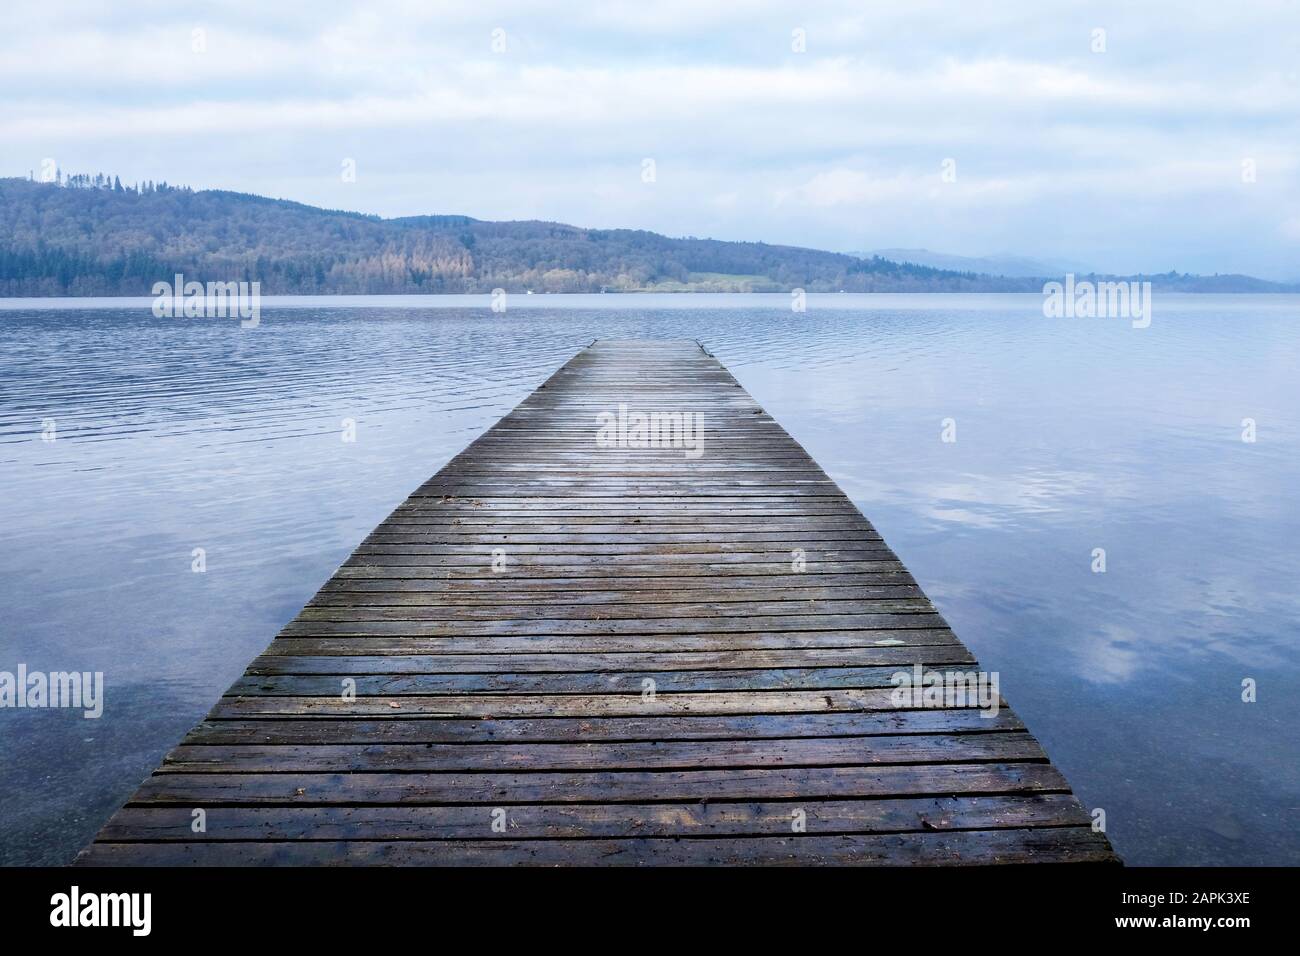 Looking down a long wooden jetty with a diminishing persepective, jutting straight out over a clear calm blue lake relecting the white and blue of the Stock Photo